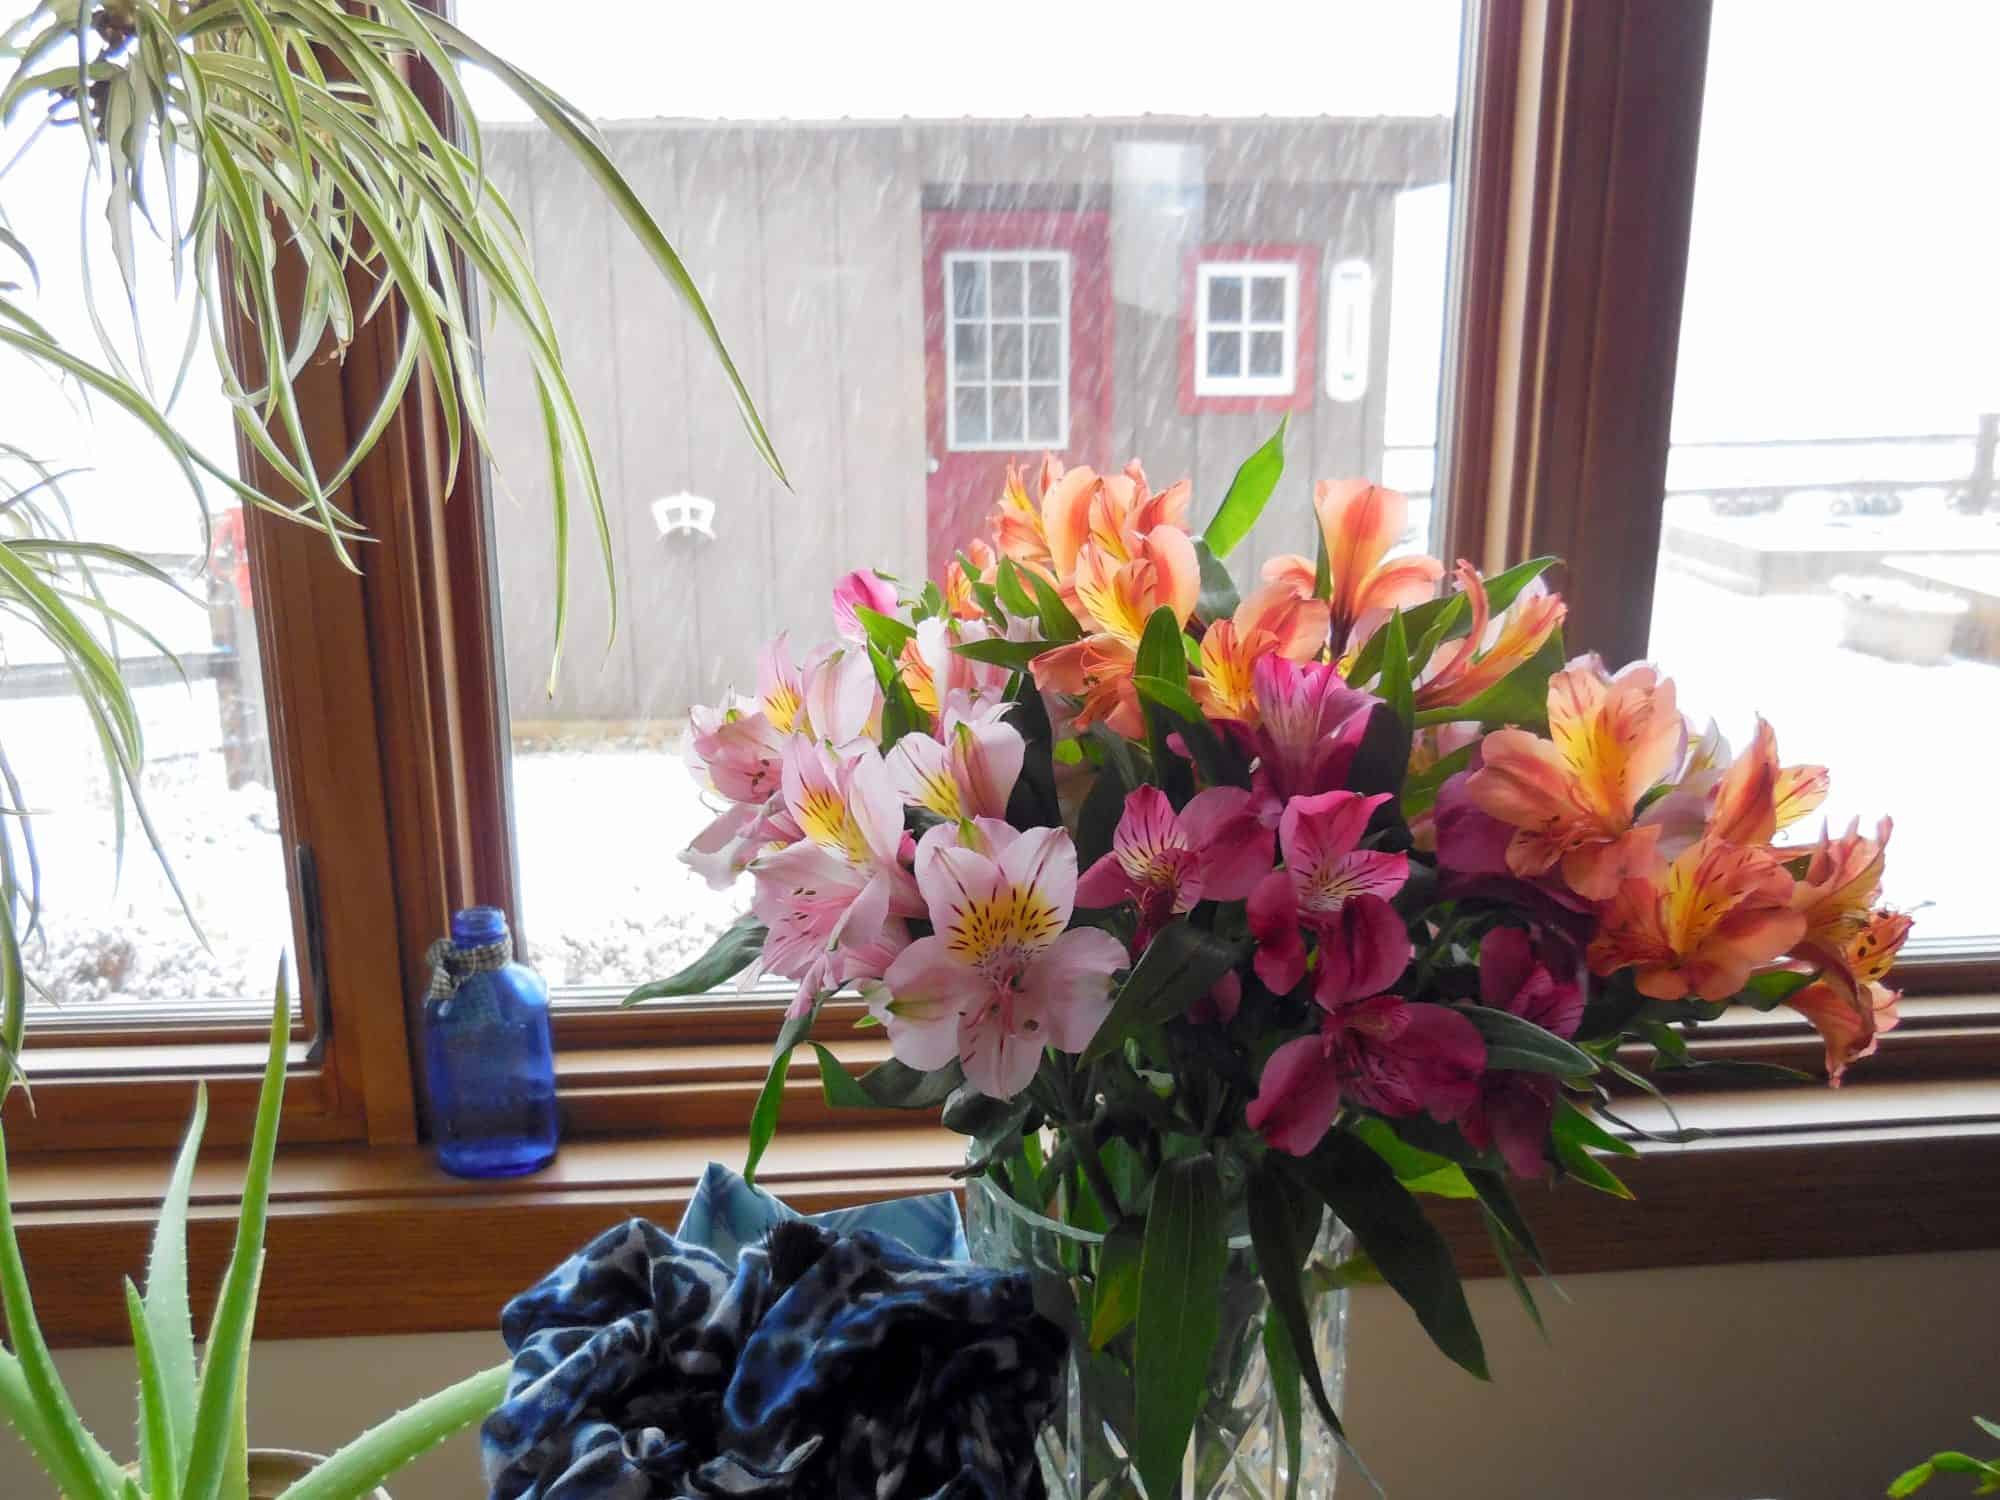 Using Color In Winter, To Cheer My Home & My Heart. A bouquet of alstromeria